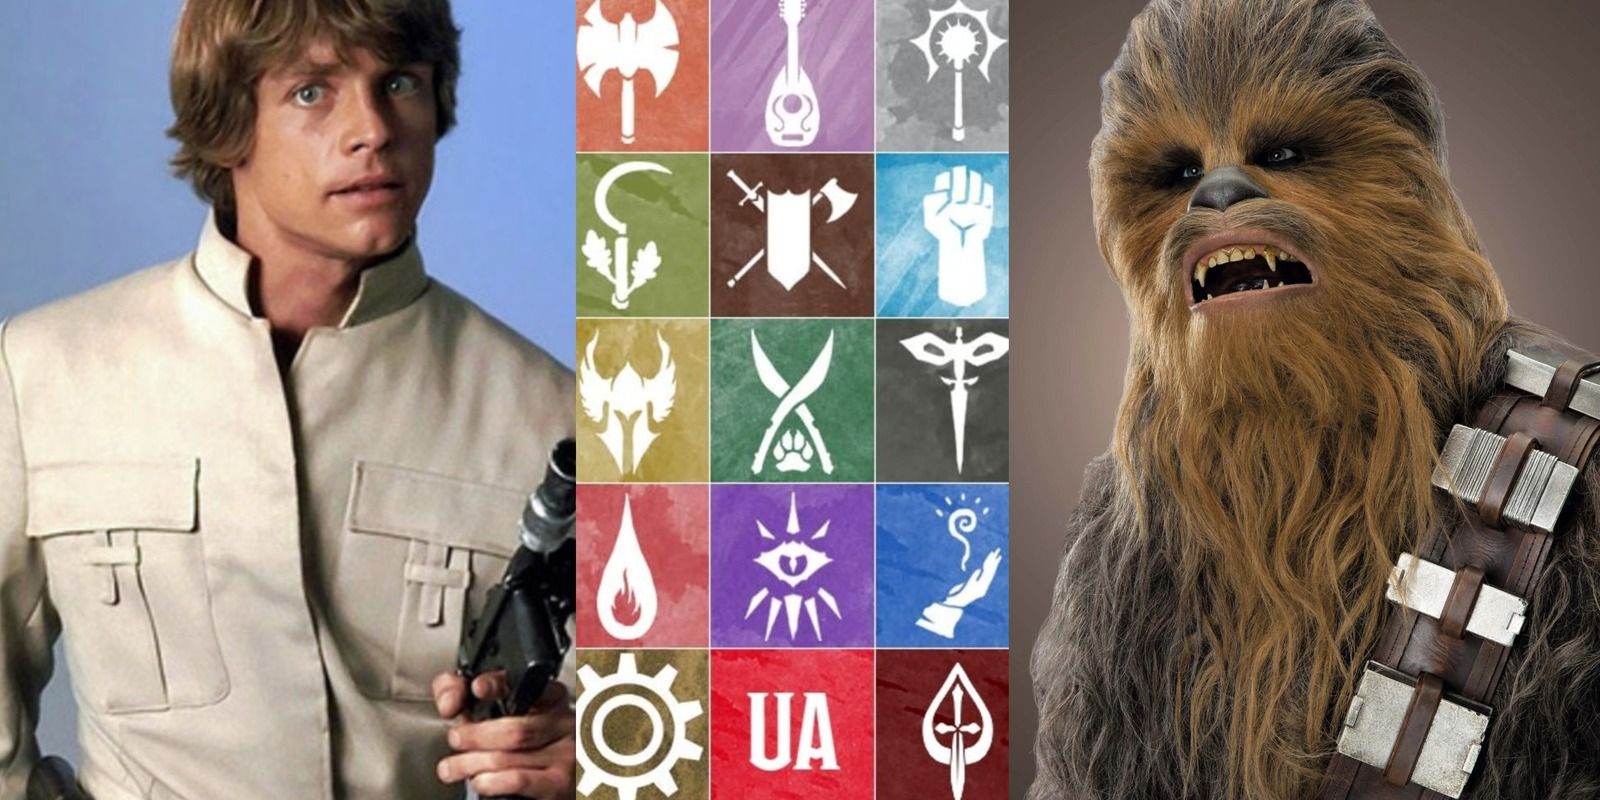 Split image of Luke Skywalker, Dungeons and Dragons classes, and Chewbacca